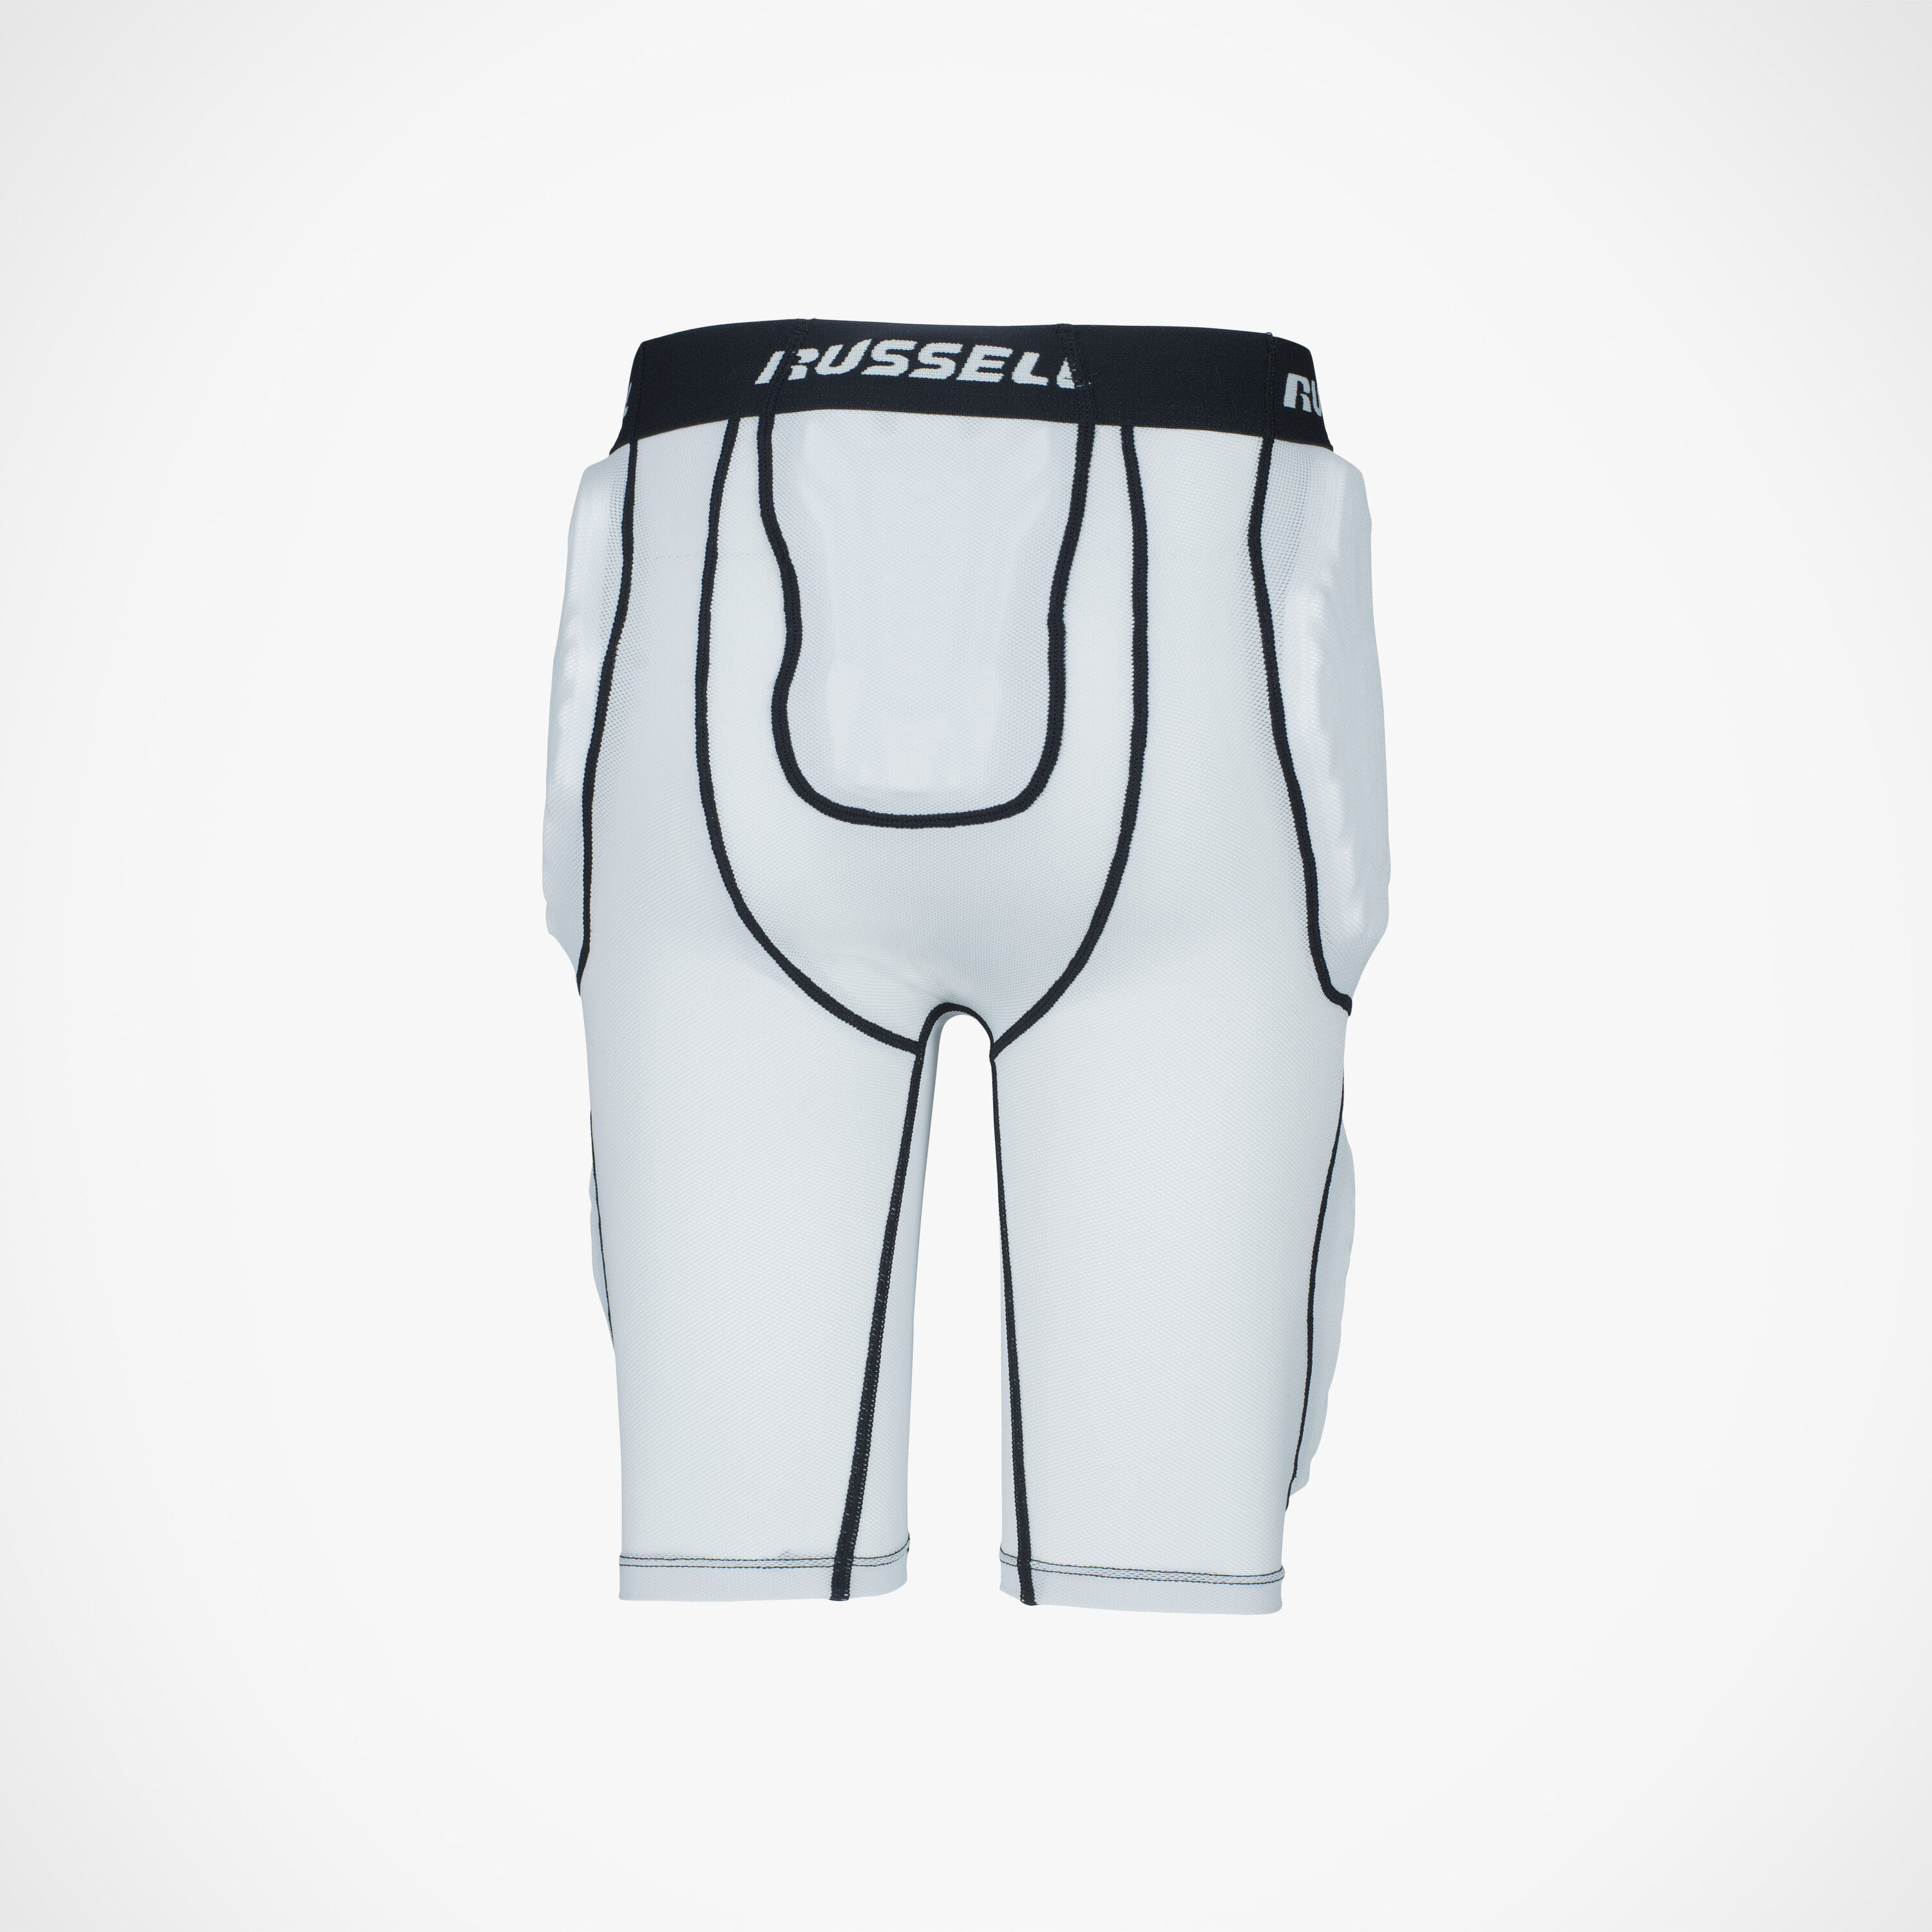 OLD STORE STOCK S35D Details about   Russell Athletic 4 Pocket Youth L White Football Girdle 